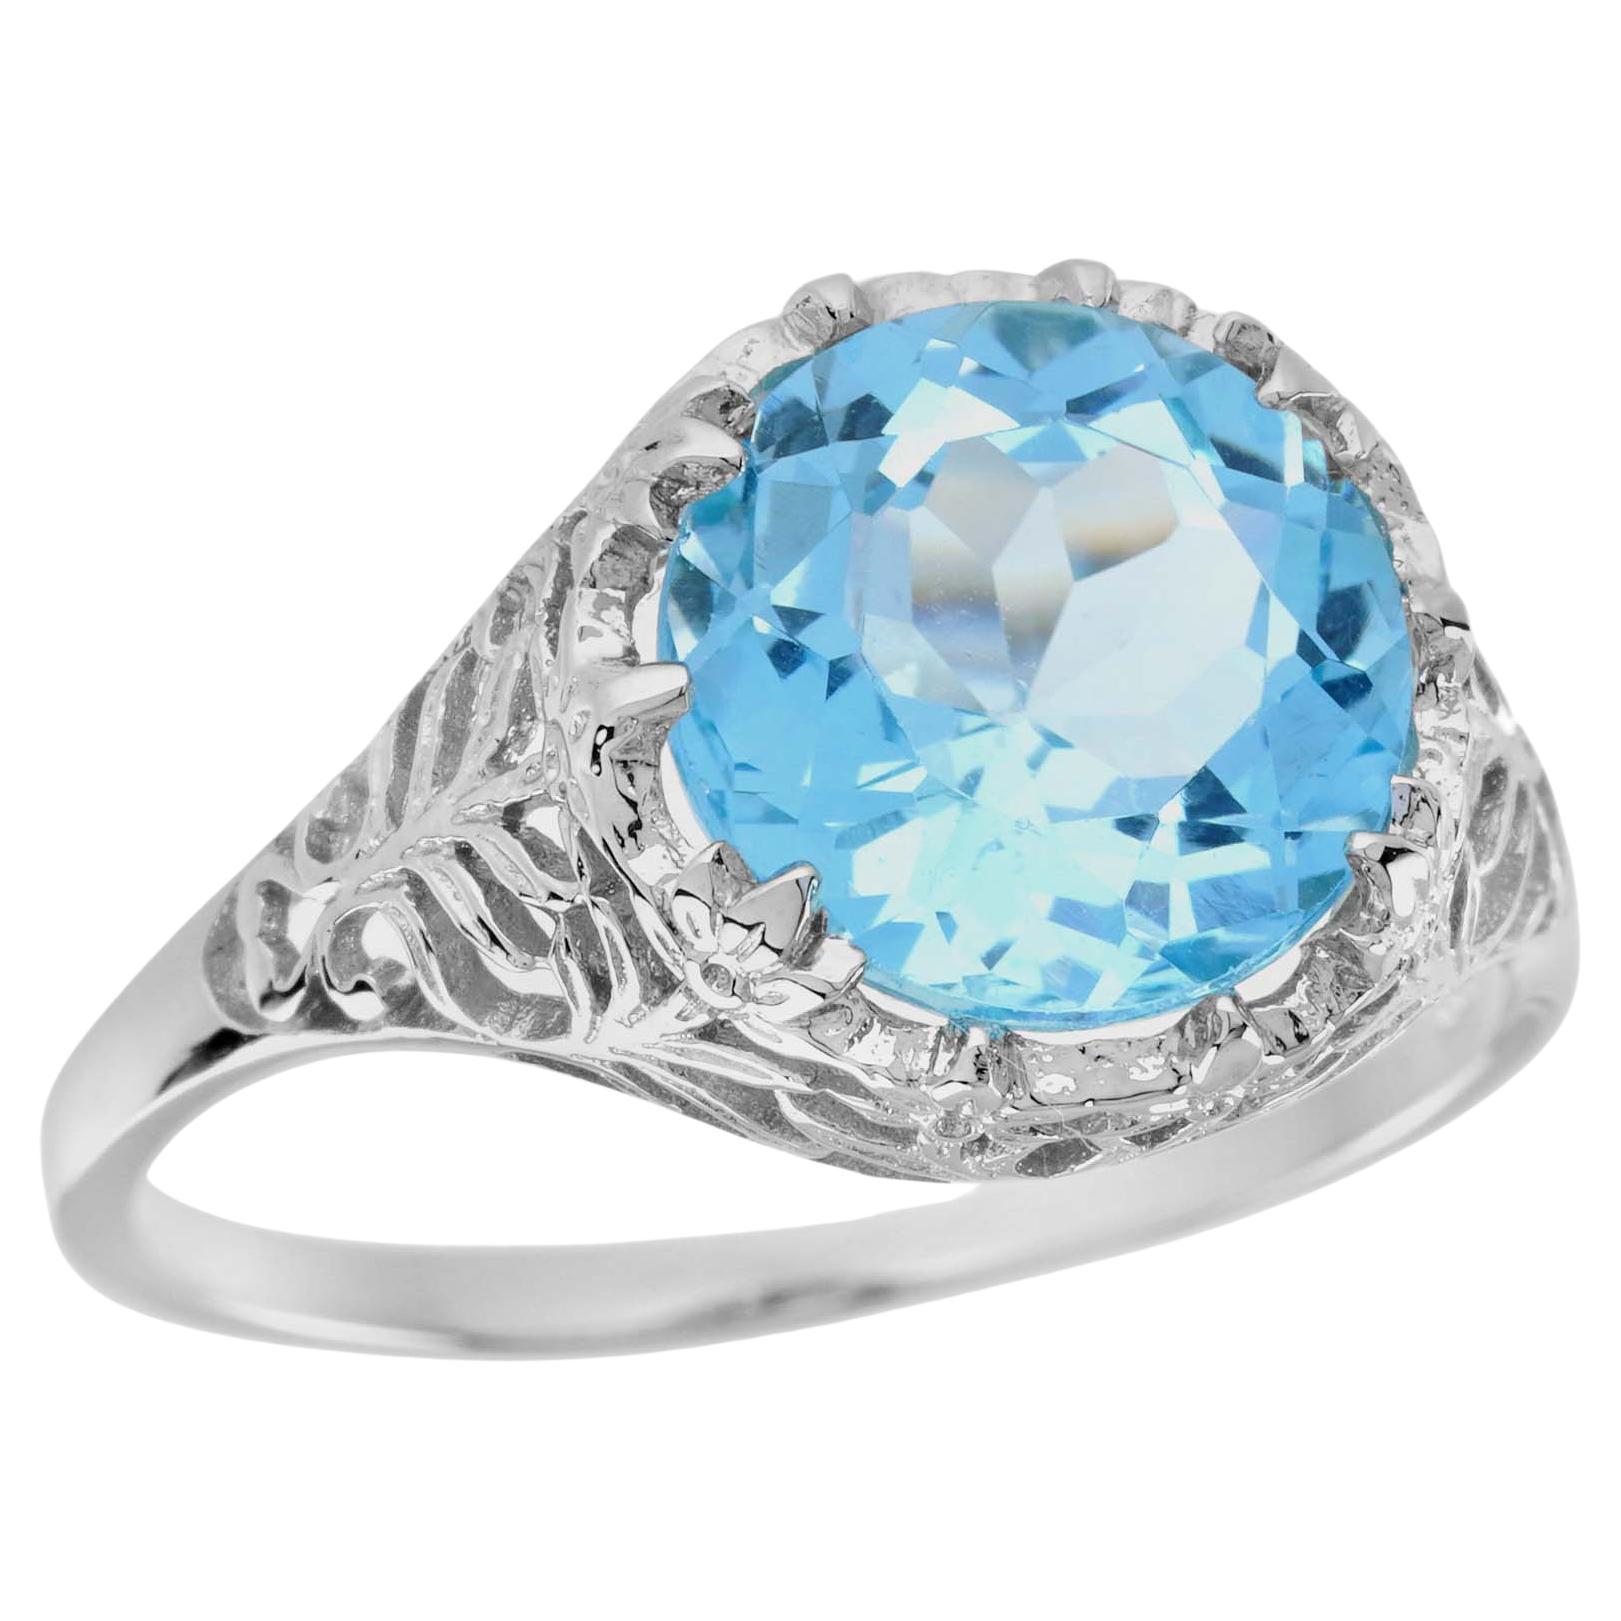 For Sale:  4.5 Ct. Natural Round Blue Topaz Vintage Style Ring in Solid 9K White Gold